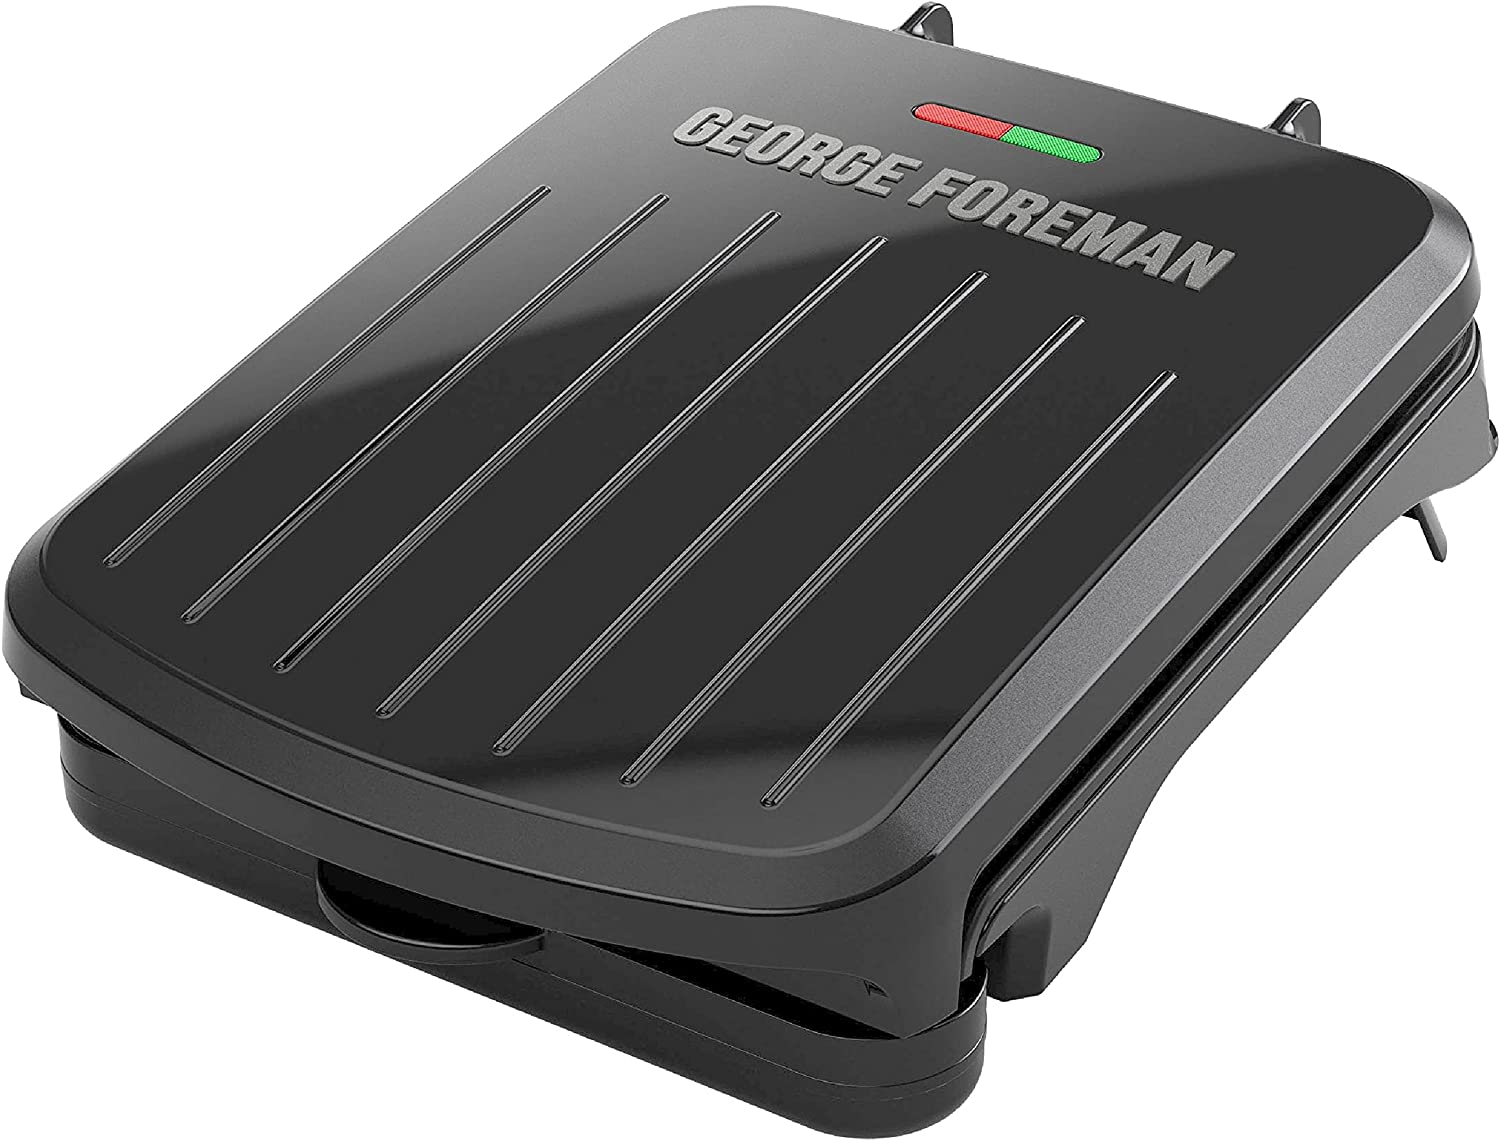 George Foreman GRS040B 2-Serving Classic Plate Electric Indoor Grill and Panini Press (Black) $14.96 + Free Shipping w/ Prime or on orders $25+